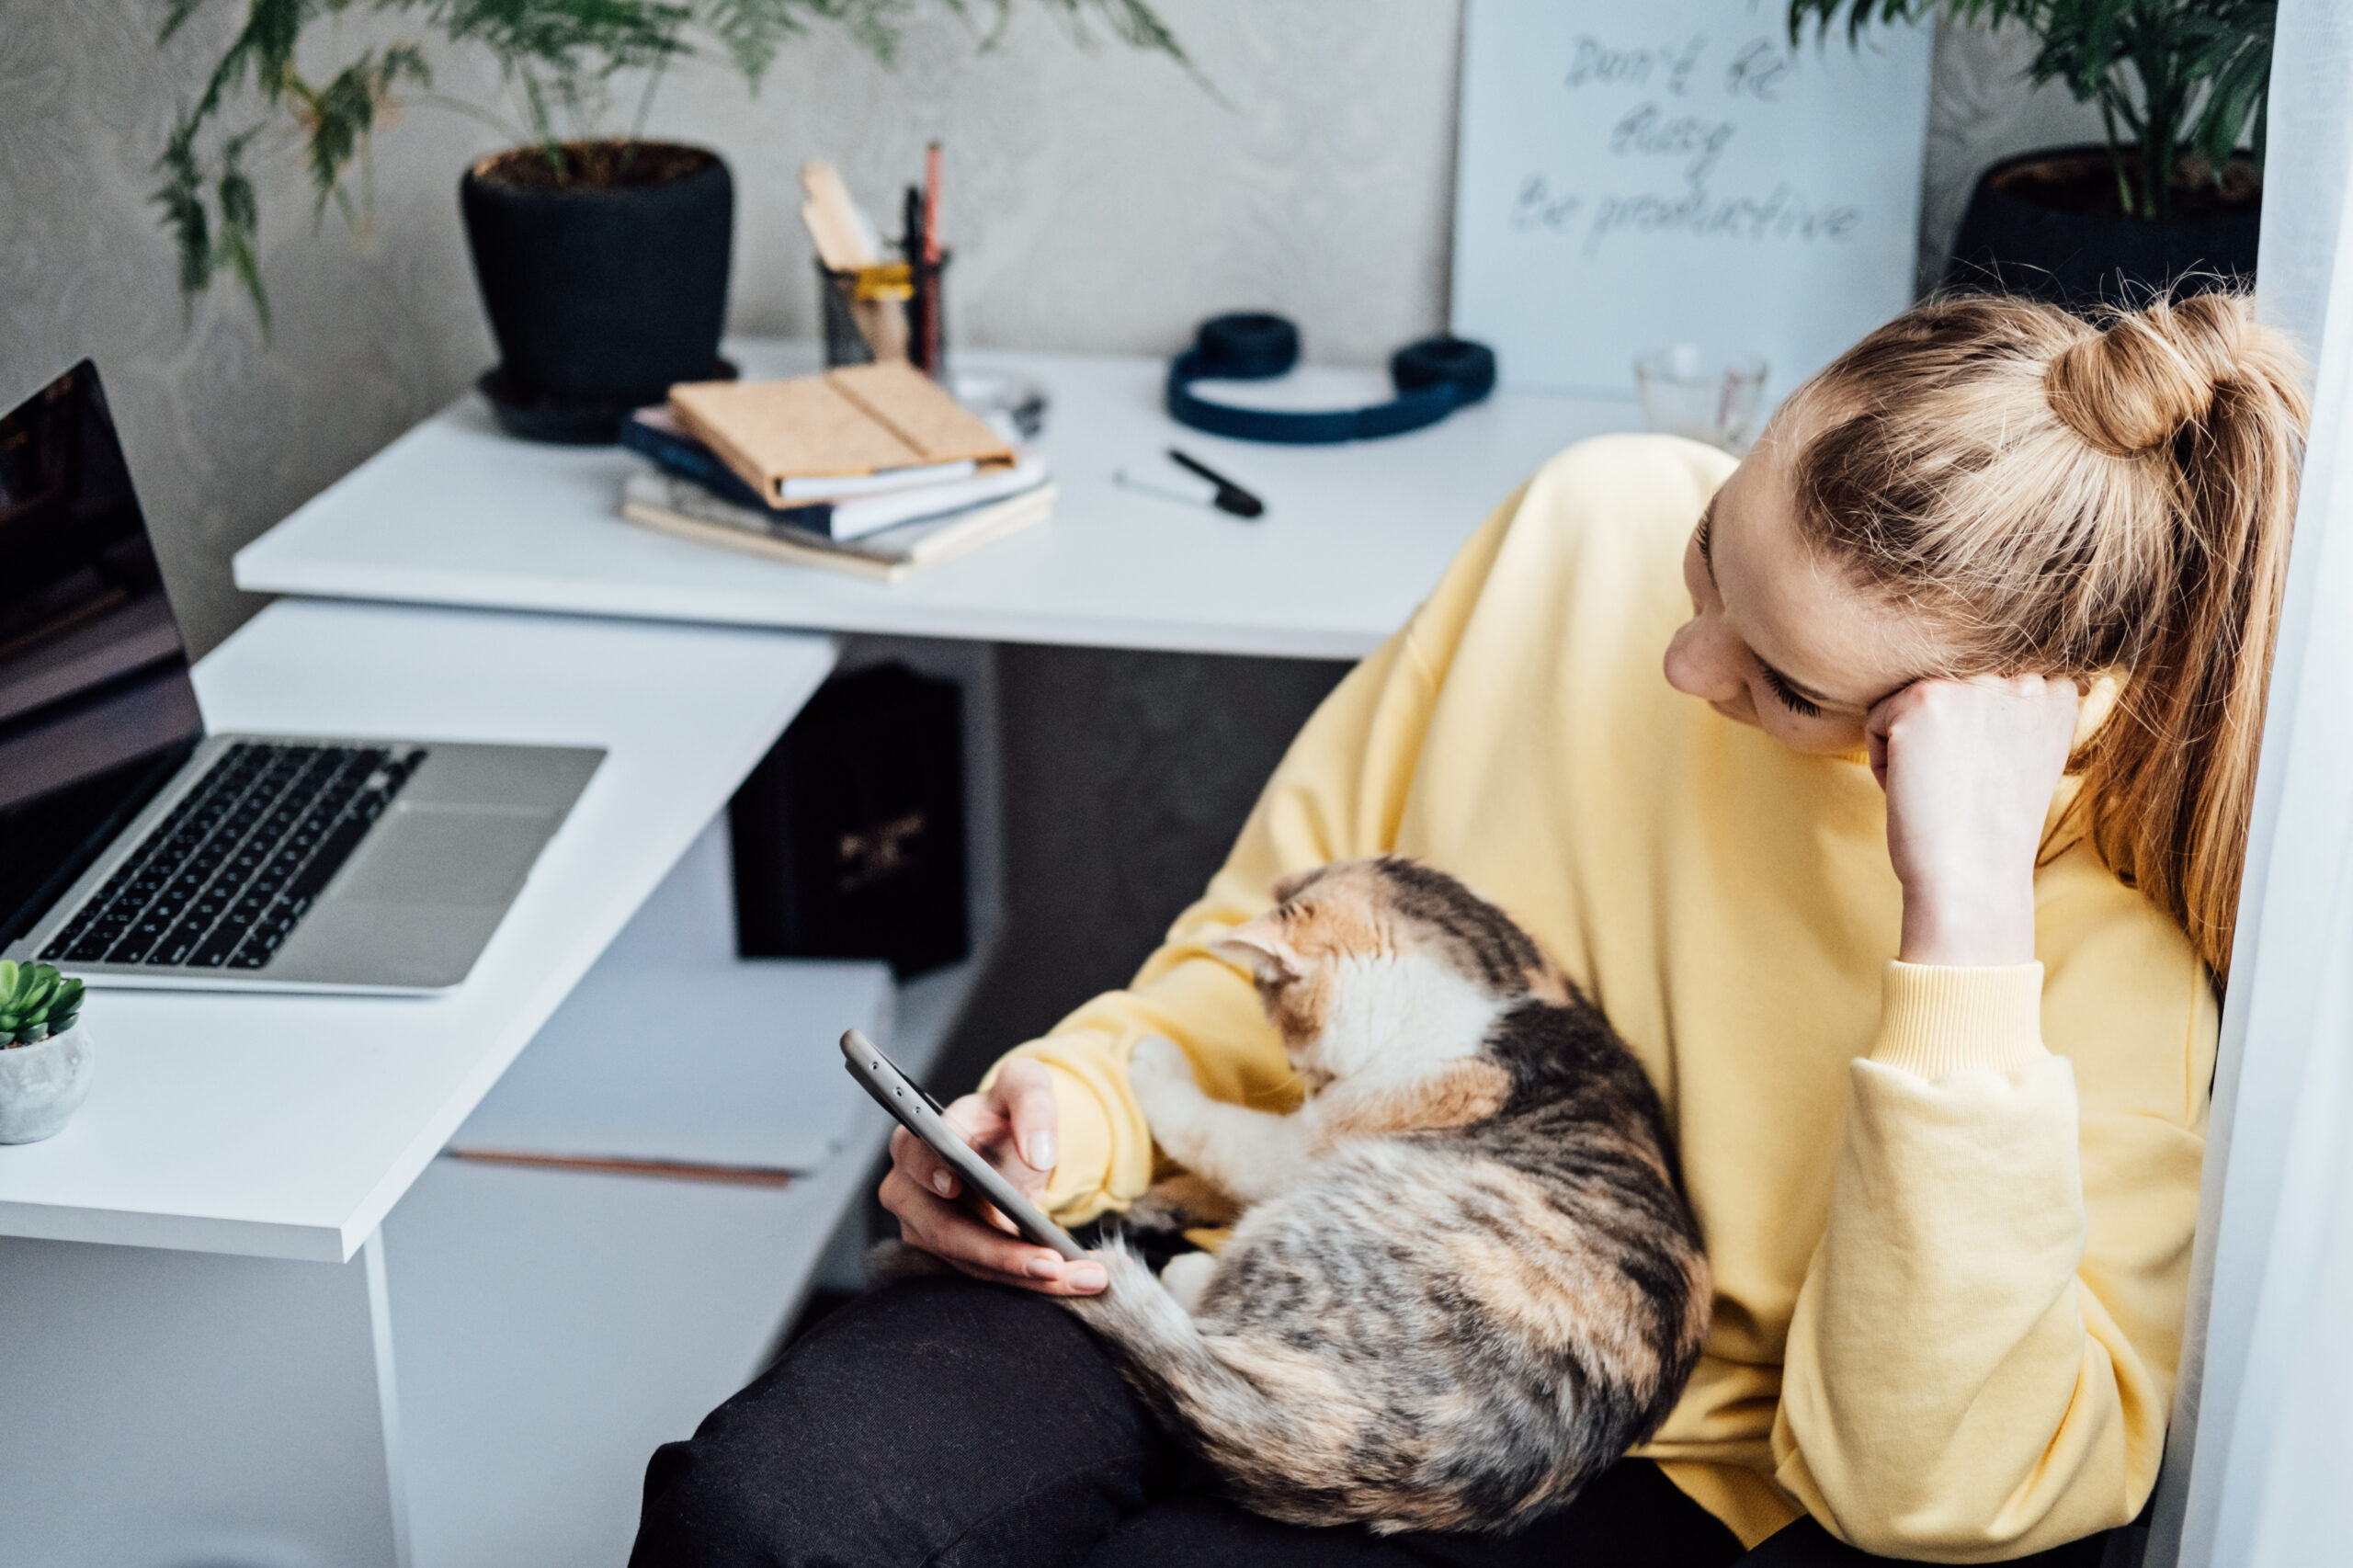 Woman freelance or procrastinate at workplace at home office. Self-employed businesswoman with cat distracted from work on laptop scrolling social media on smartphone.